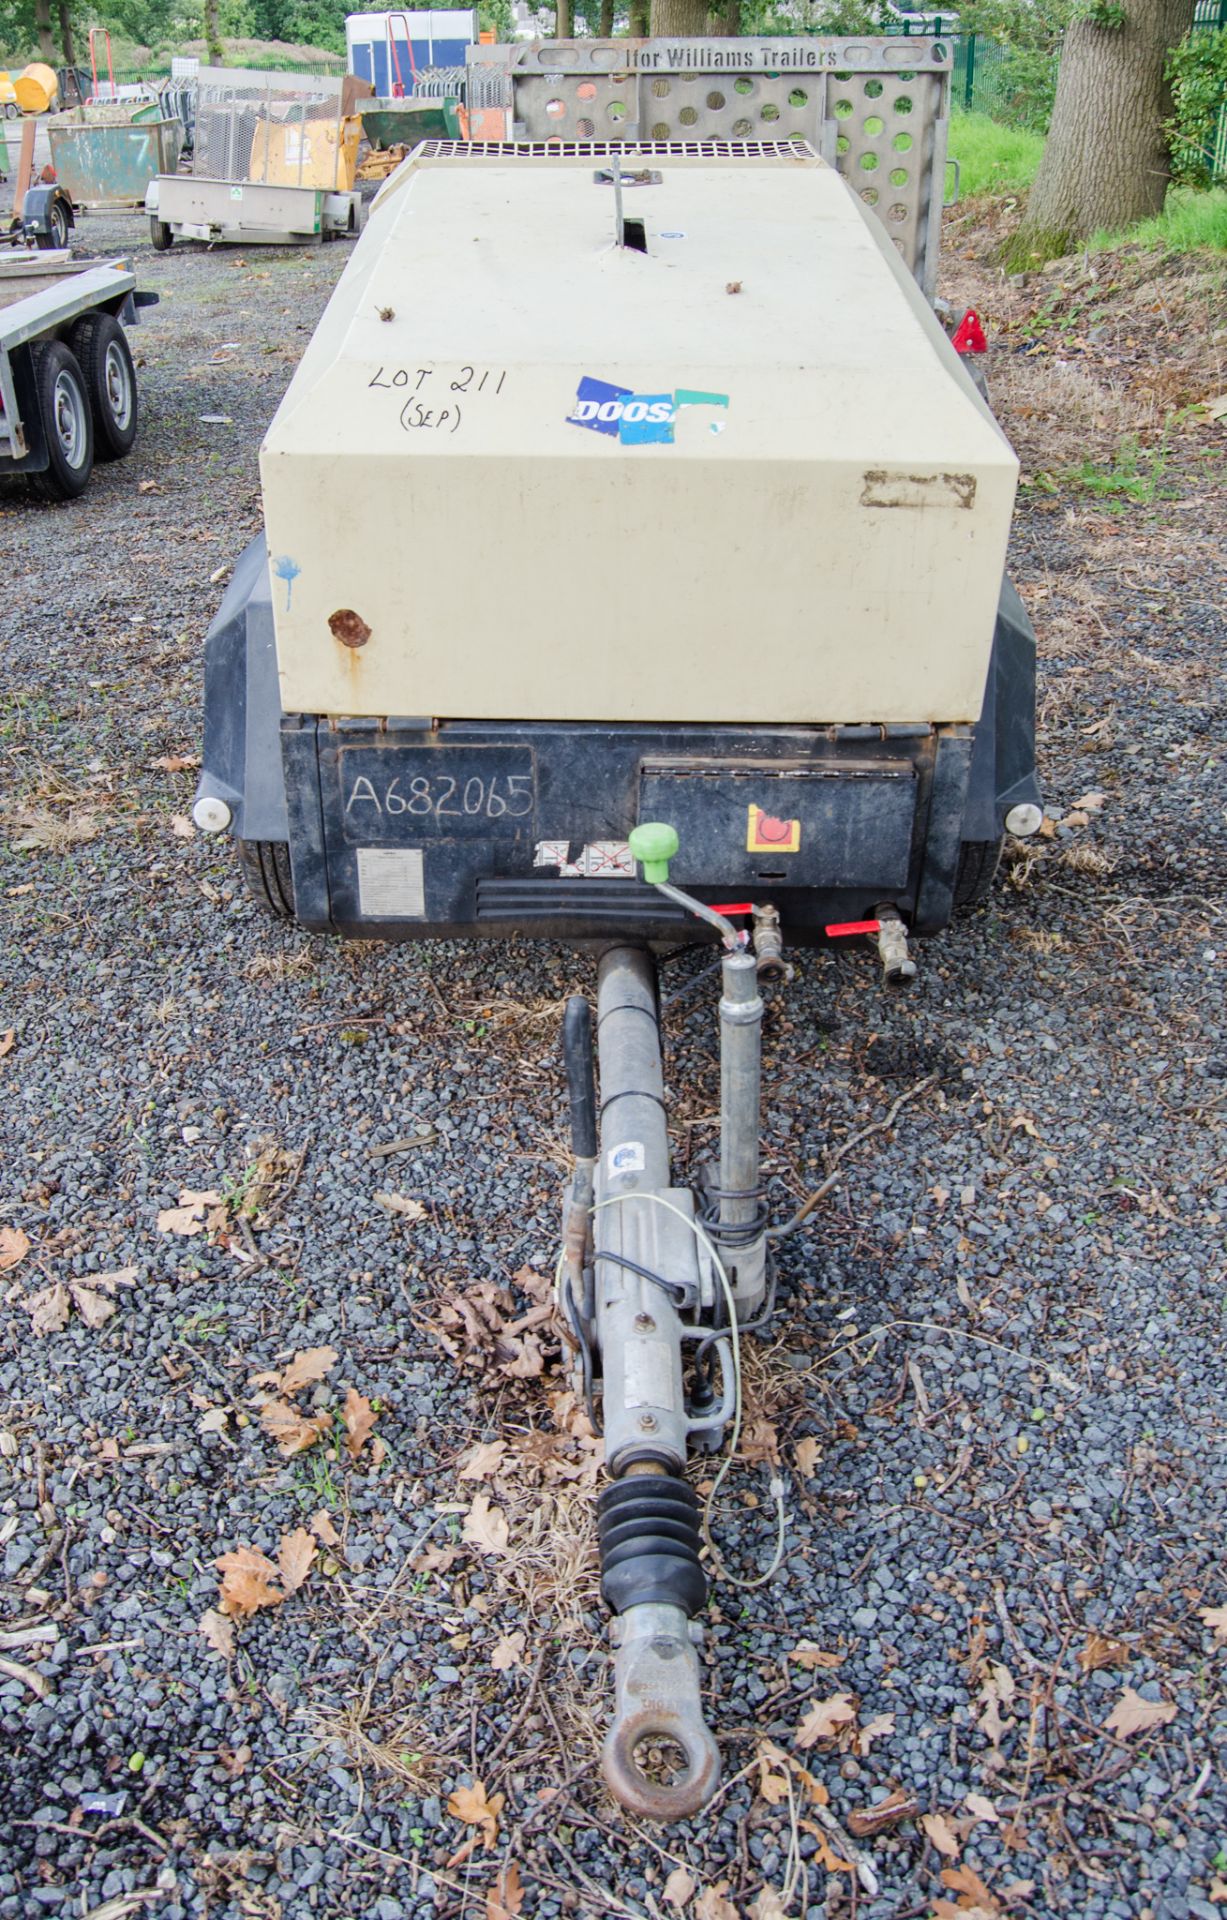 Doosan 7/41 diesel driven fast tow air compressor Year: 2015 S/N: 053202 Recorded hours: 1528 - Image 3 of 7